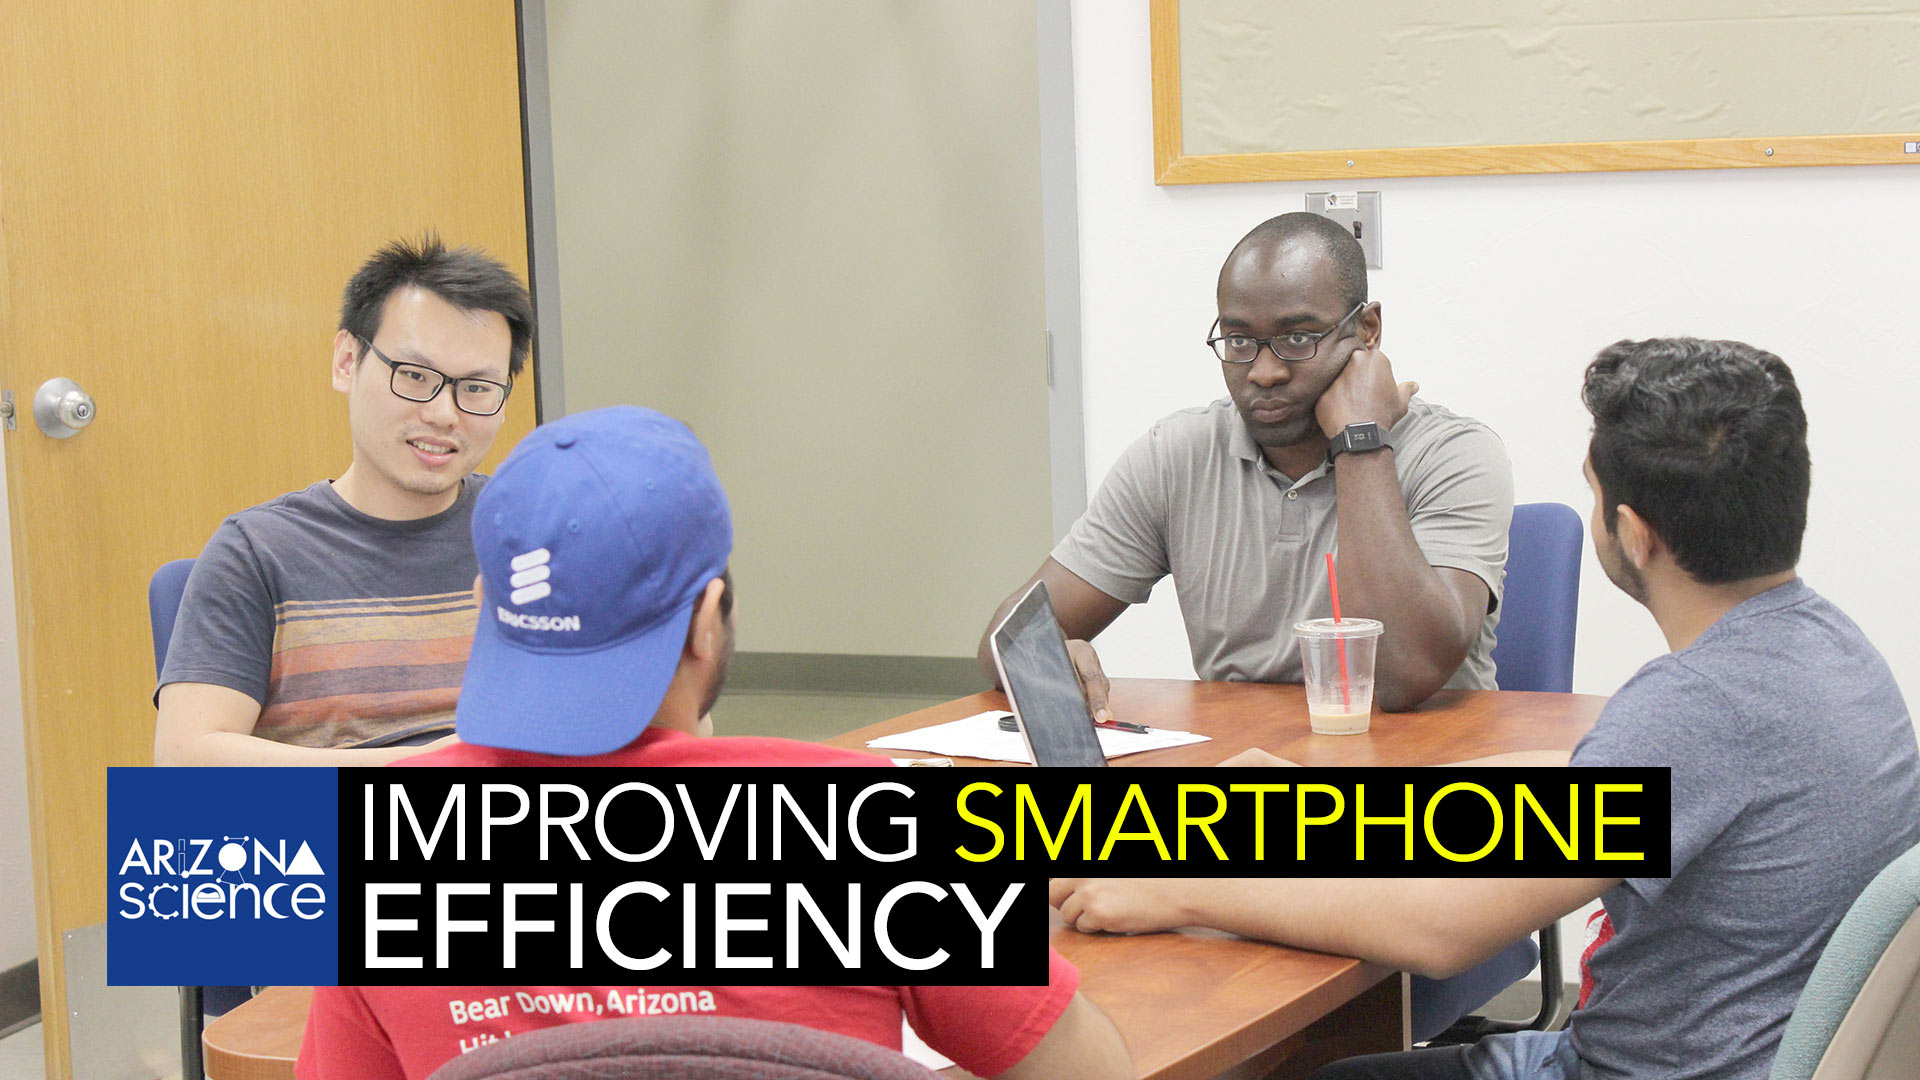 Tosi Adegbija (third from left) and his team are researching new ways to improve efficiency in smartphones.